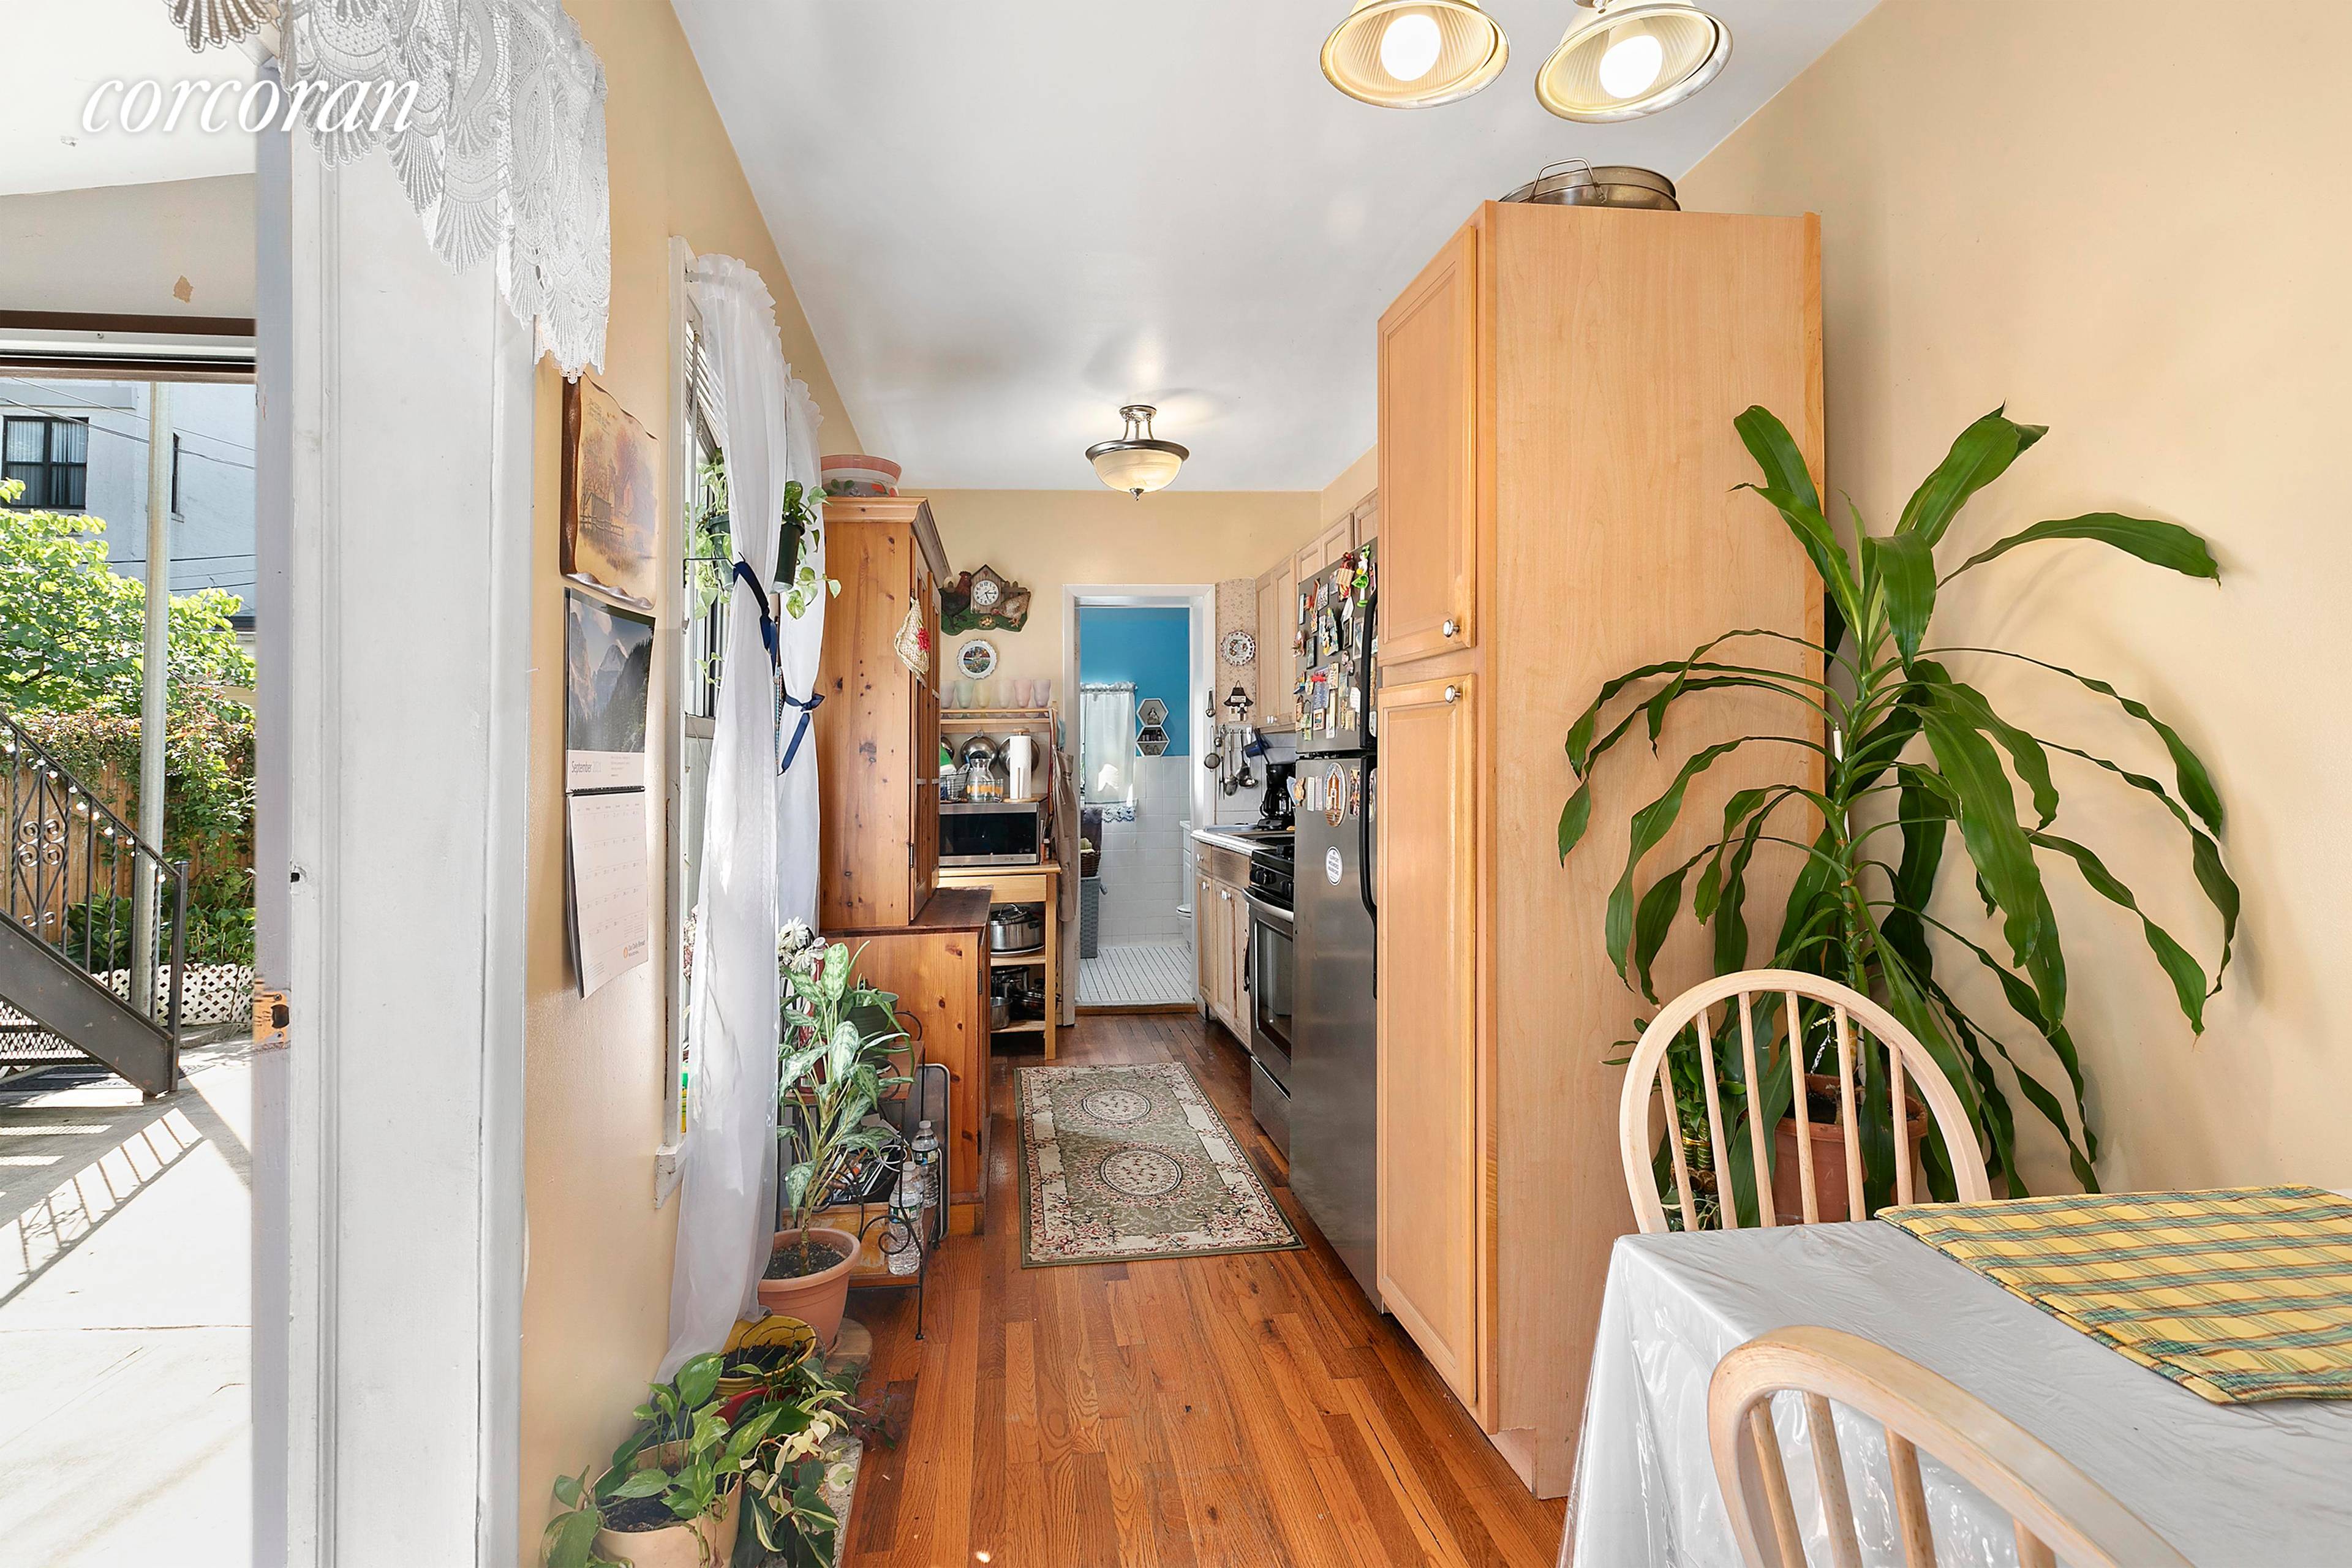 Prime location and Rare Opportunity to own this semi detached 3 Unit 3 Story Basement, building in South Park Slope.